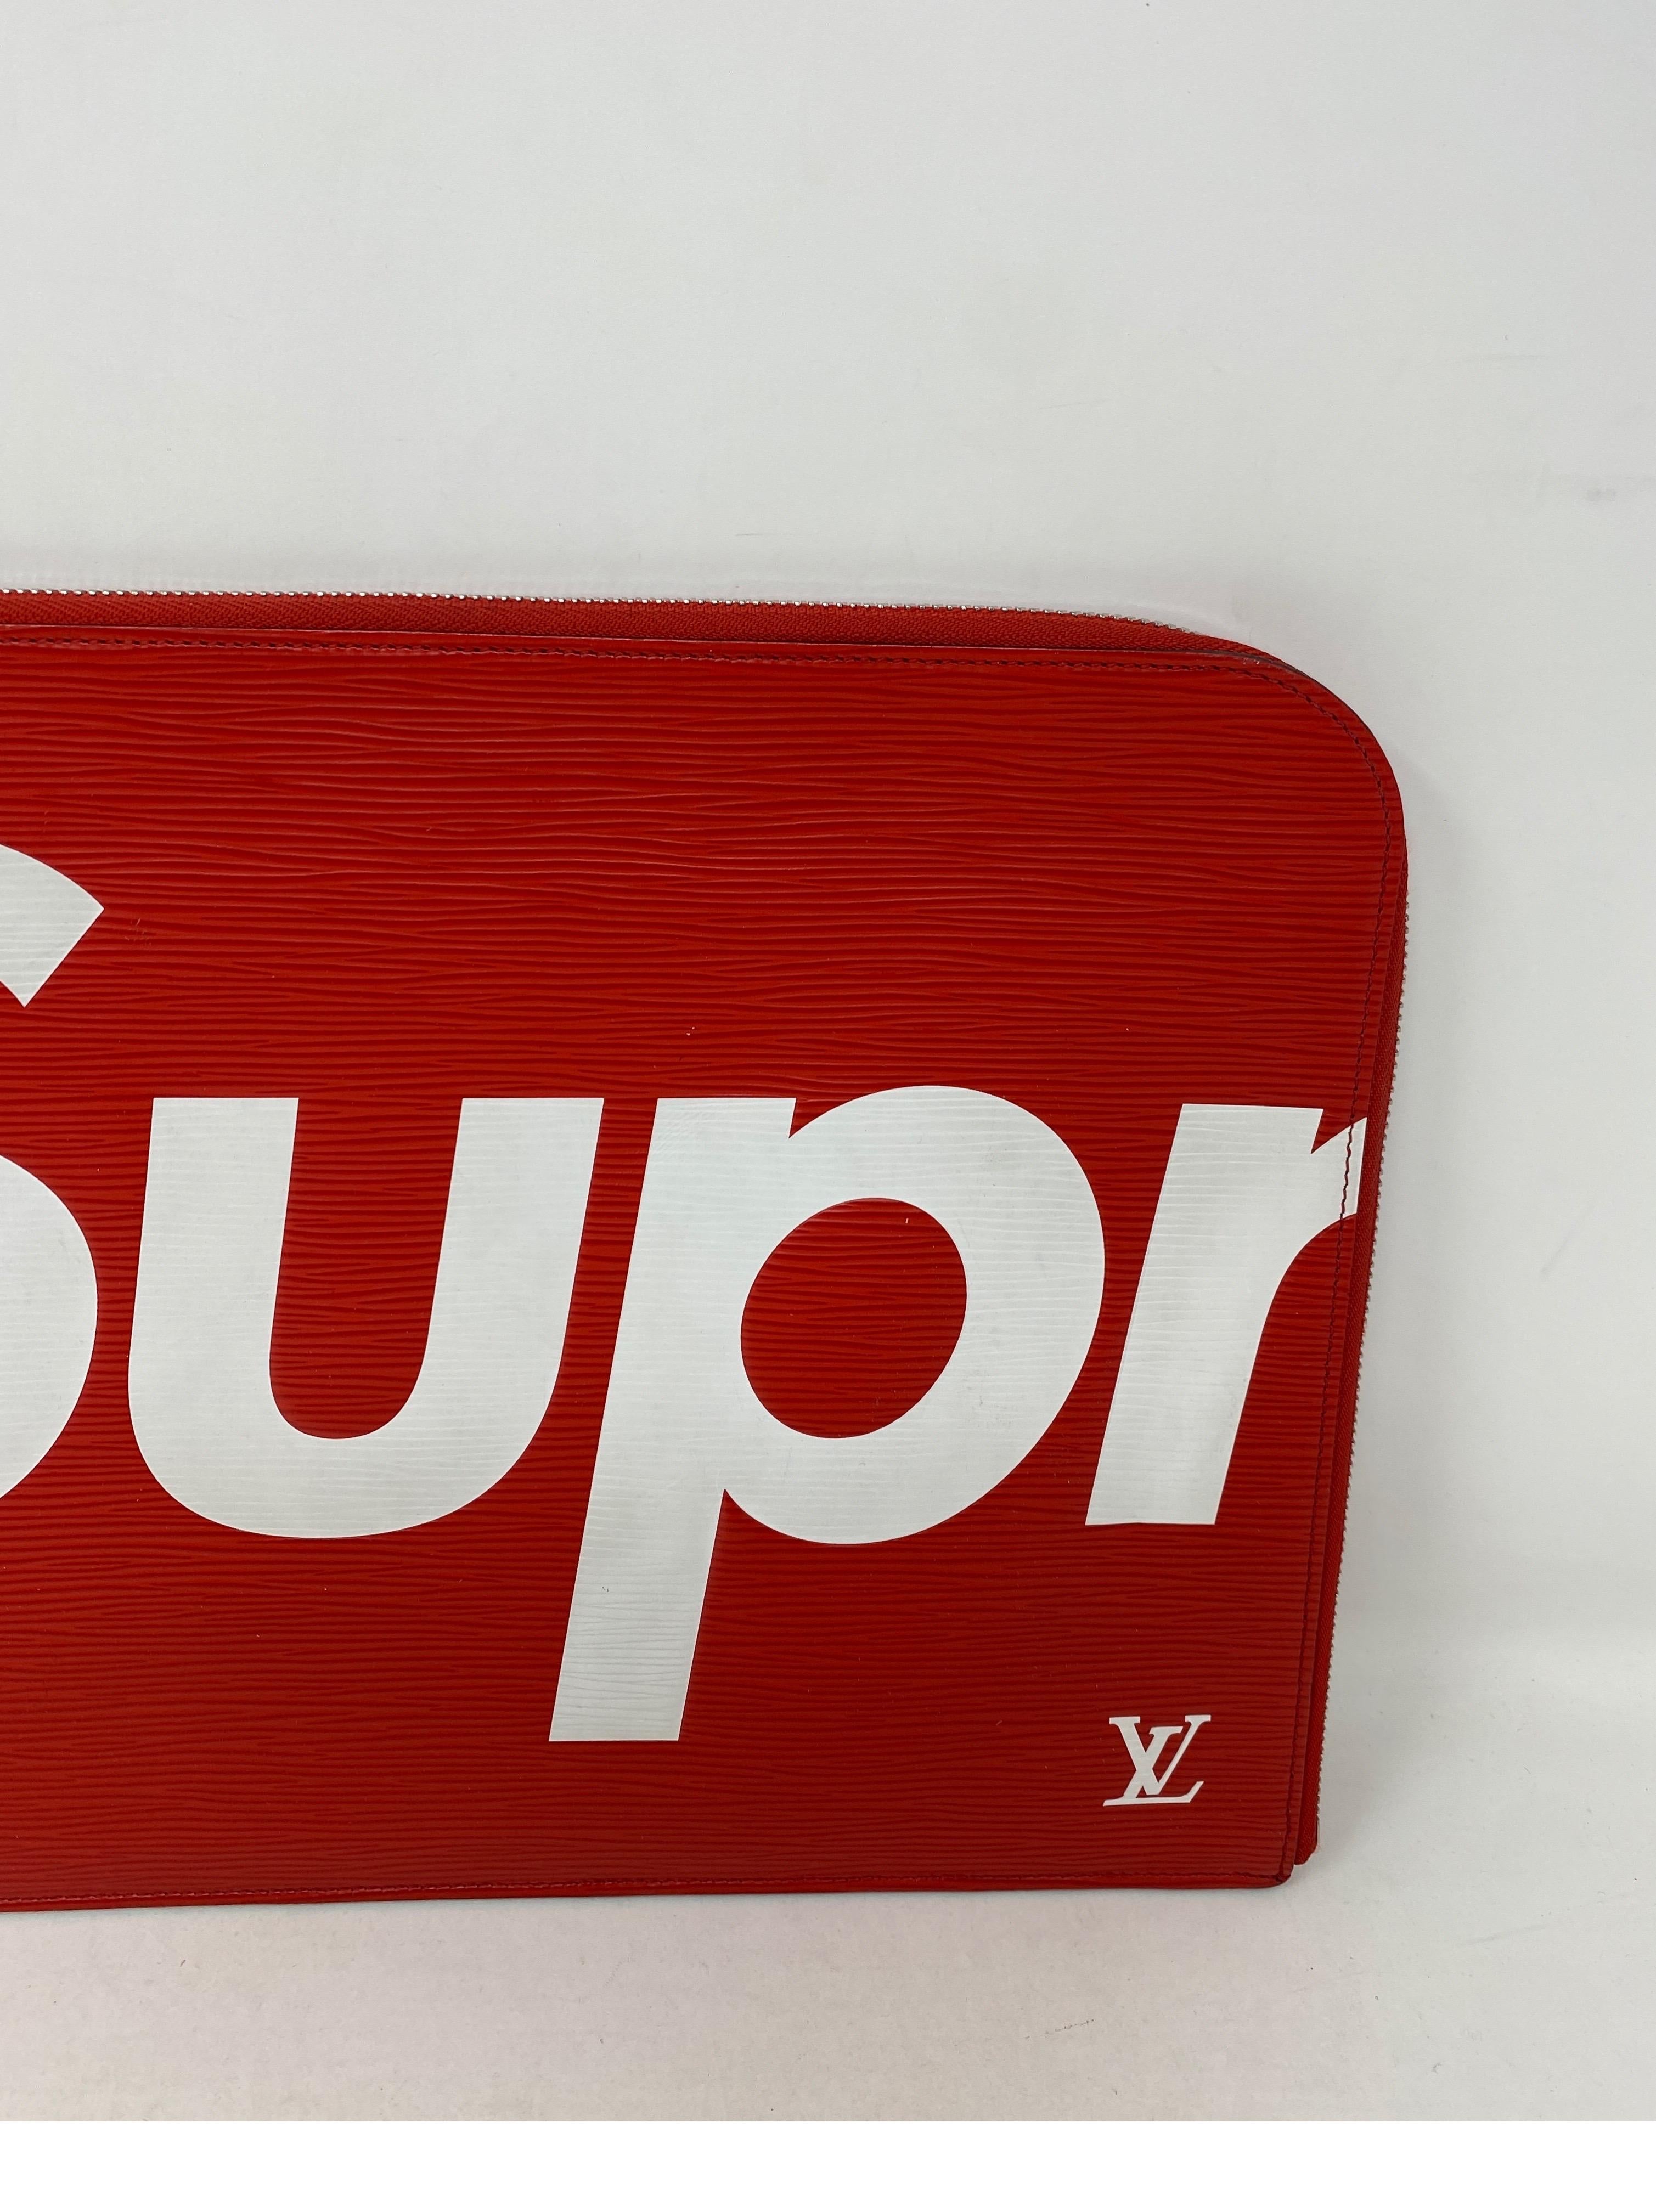 Louis Vuitton Red Supreme Clutch. Portfolio or laptop holder. Can be worn as a clutch or accessory. Red epi leather by LV and Supreme Collaboration. Rare and limited collection. Good condition. Guaranteed authentic. 